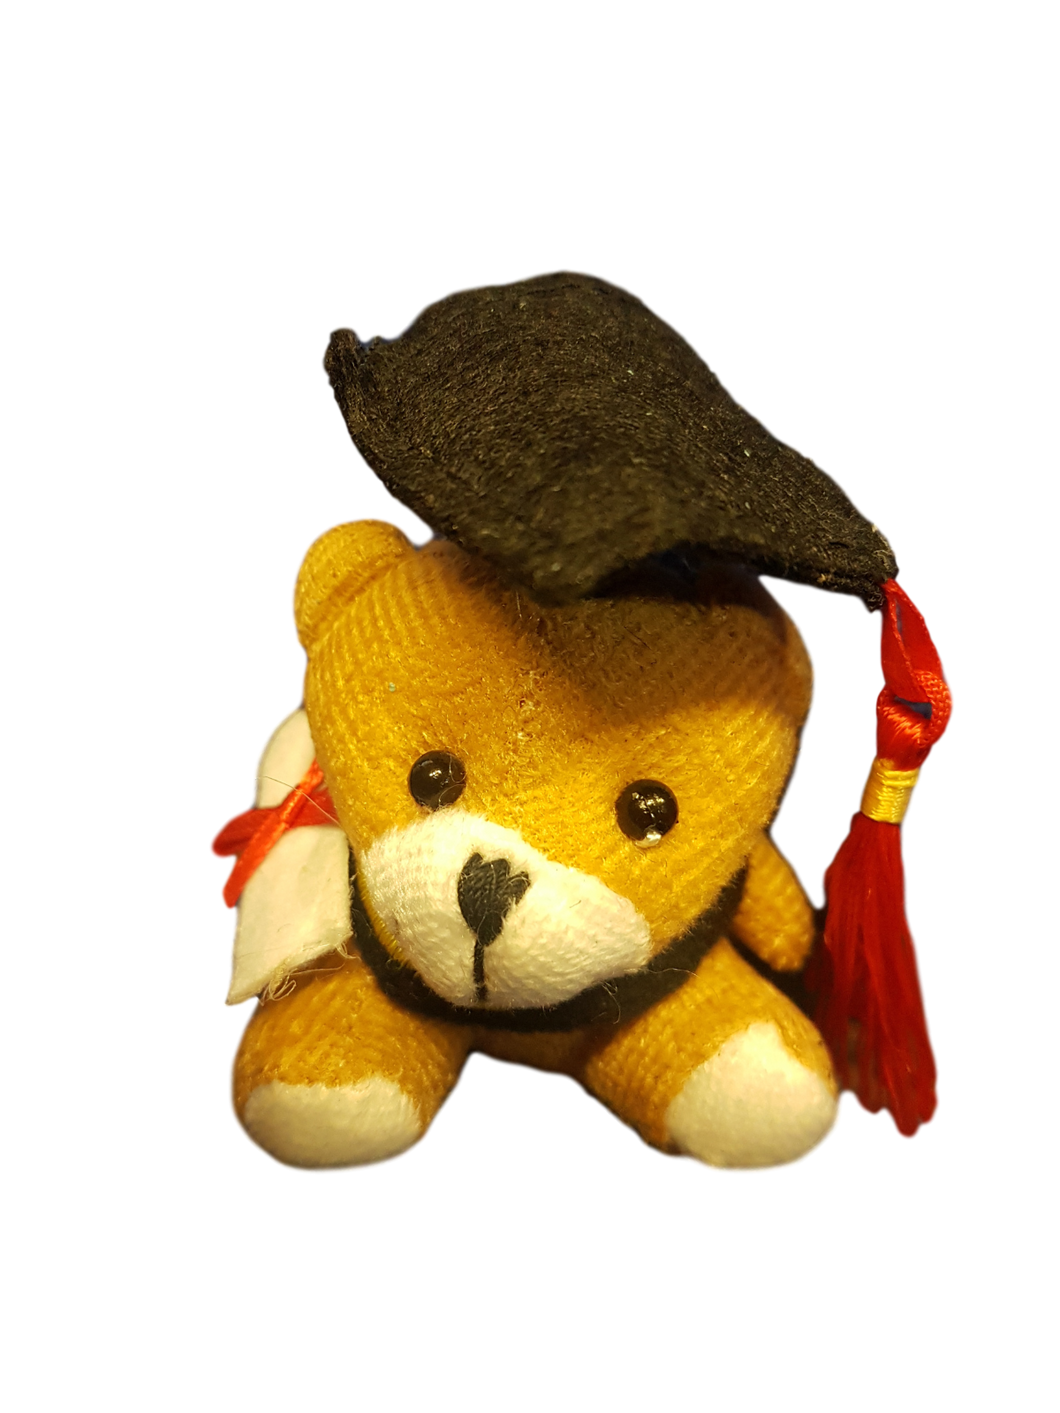 SMALL FUR BROWN COLLEGE UNIVERSITY GRADUATION TEDDY BEAR WITH DIPLOMA GIFT IDEA